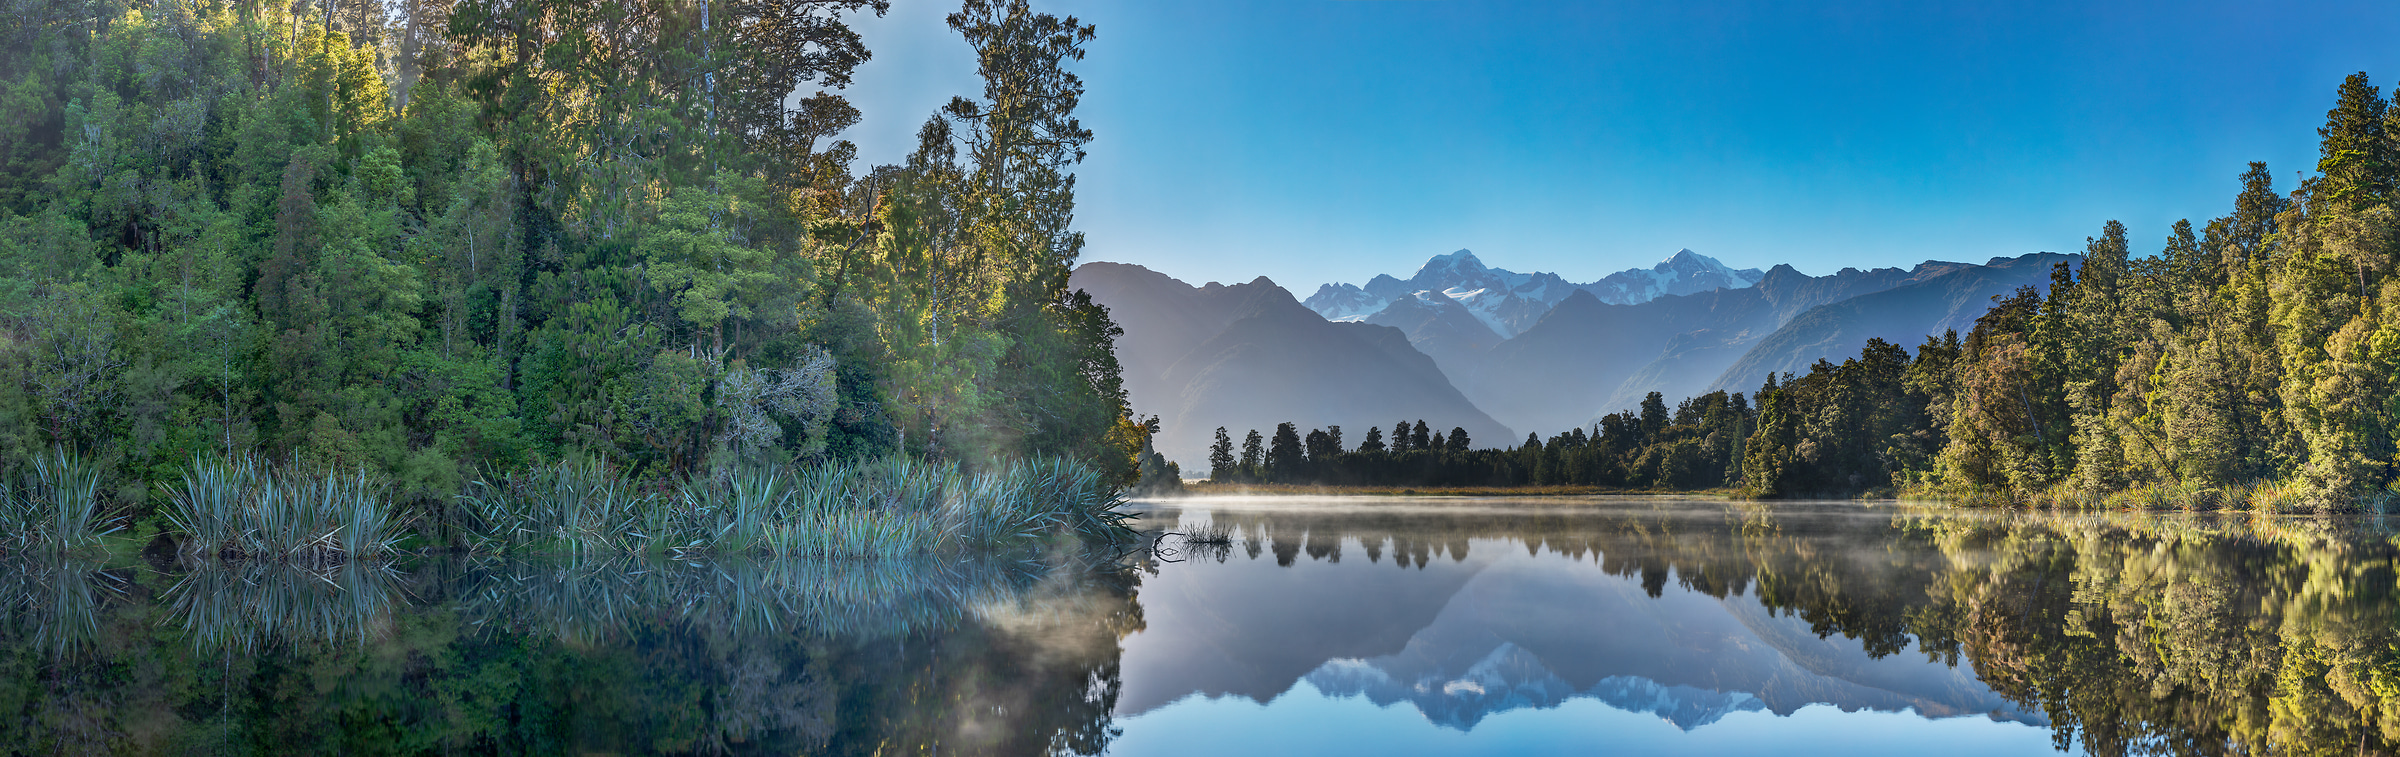 1,727 megapixels! A very high resolution, large-format VAST photo print of a lake in front of a mountain range; landscape photograph created by John Freeman in Lake Matheson, South Island, New Zealand